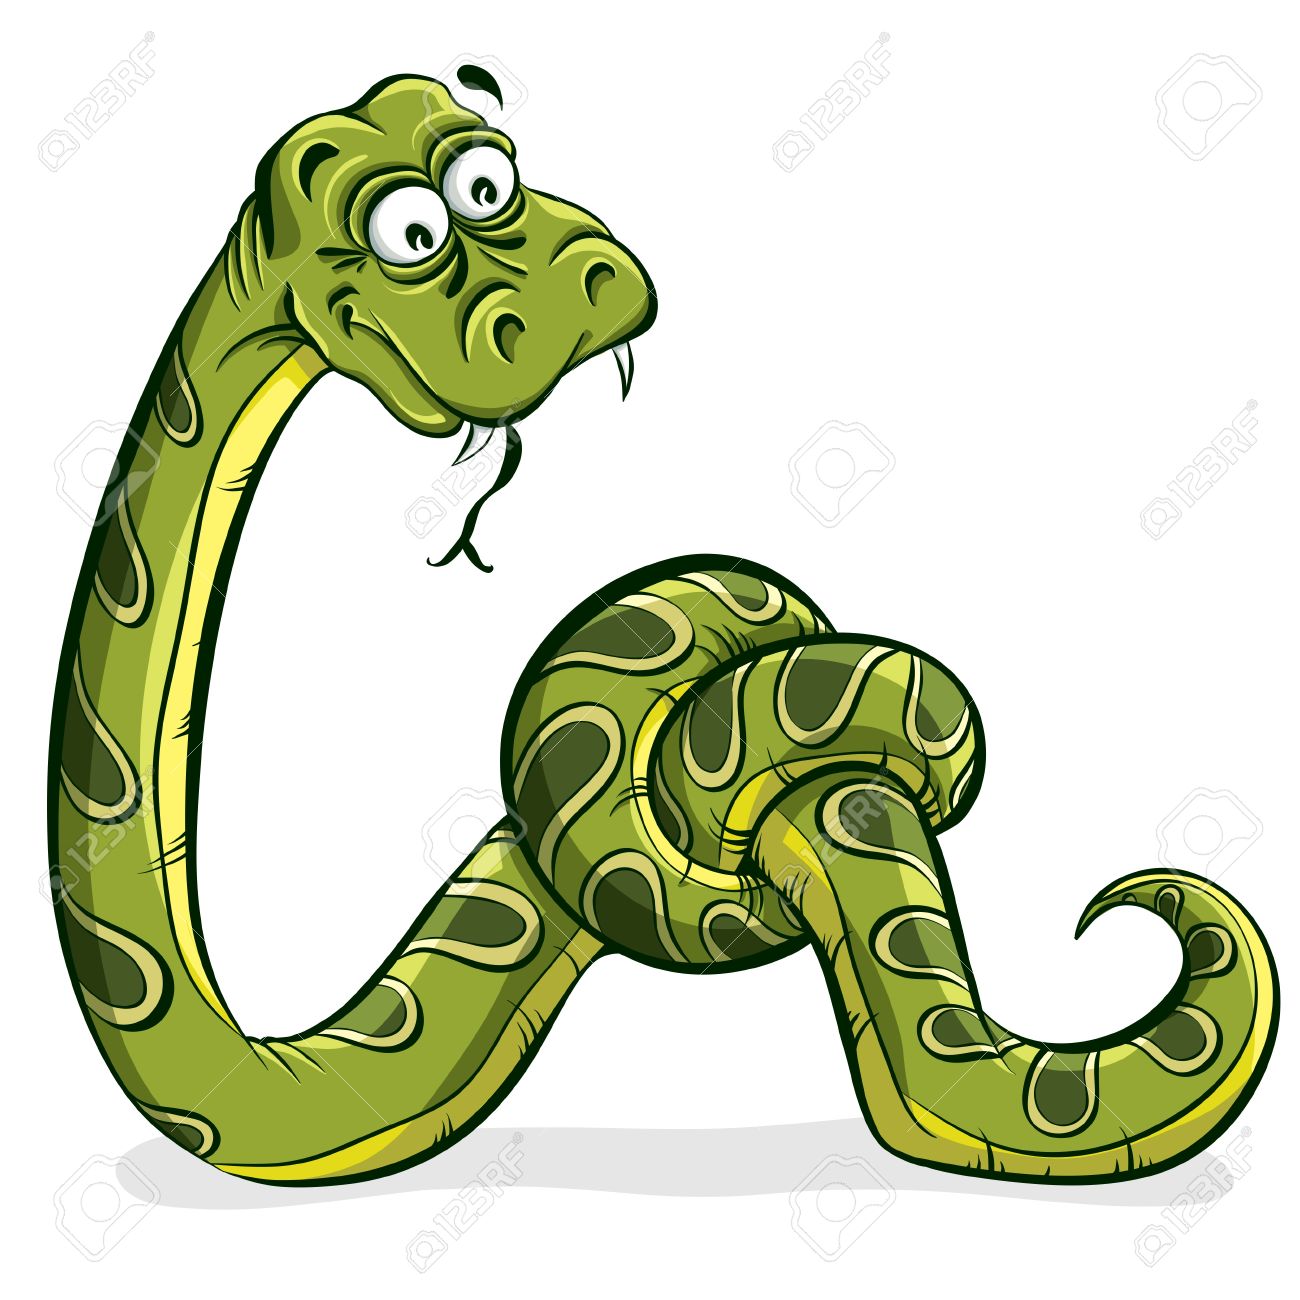 15275236-Green-snake-cartoon-tied-up-in-a-knot-Stock-Photo.jpg